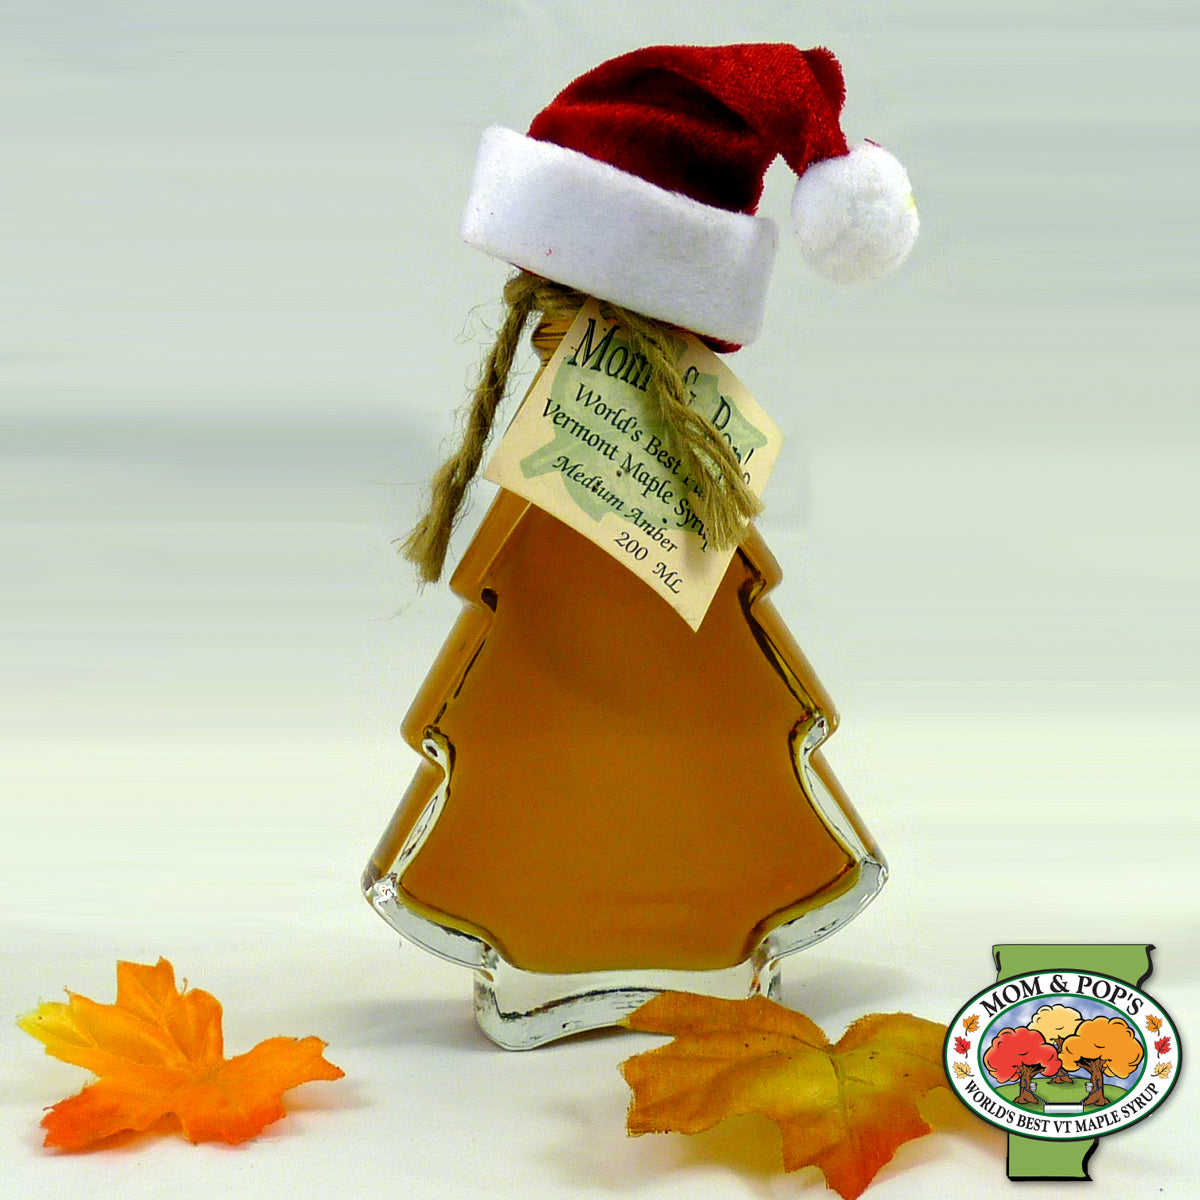 A Christmas tree-shaped bottle of Vermont maple syrup